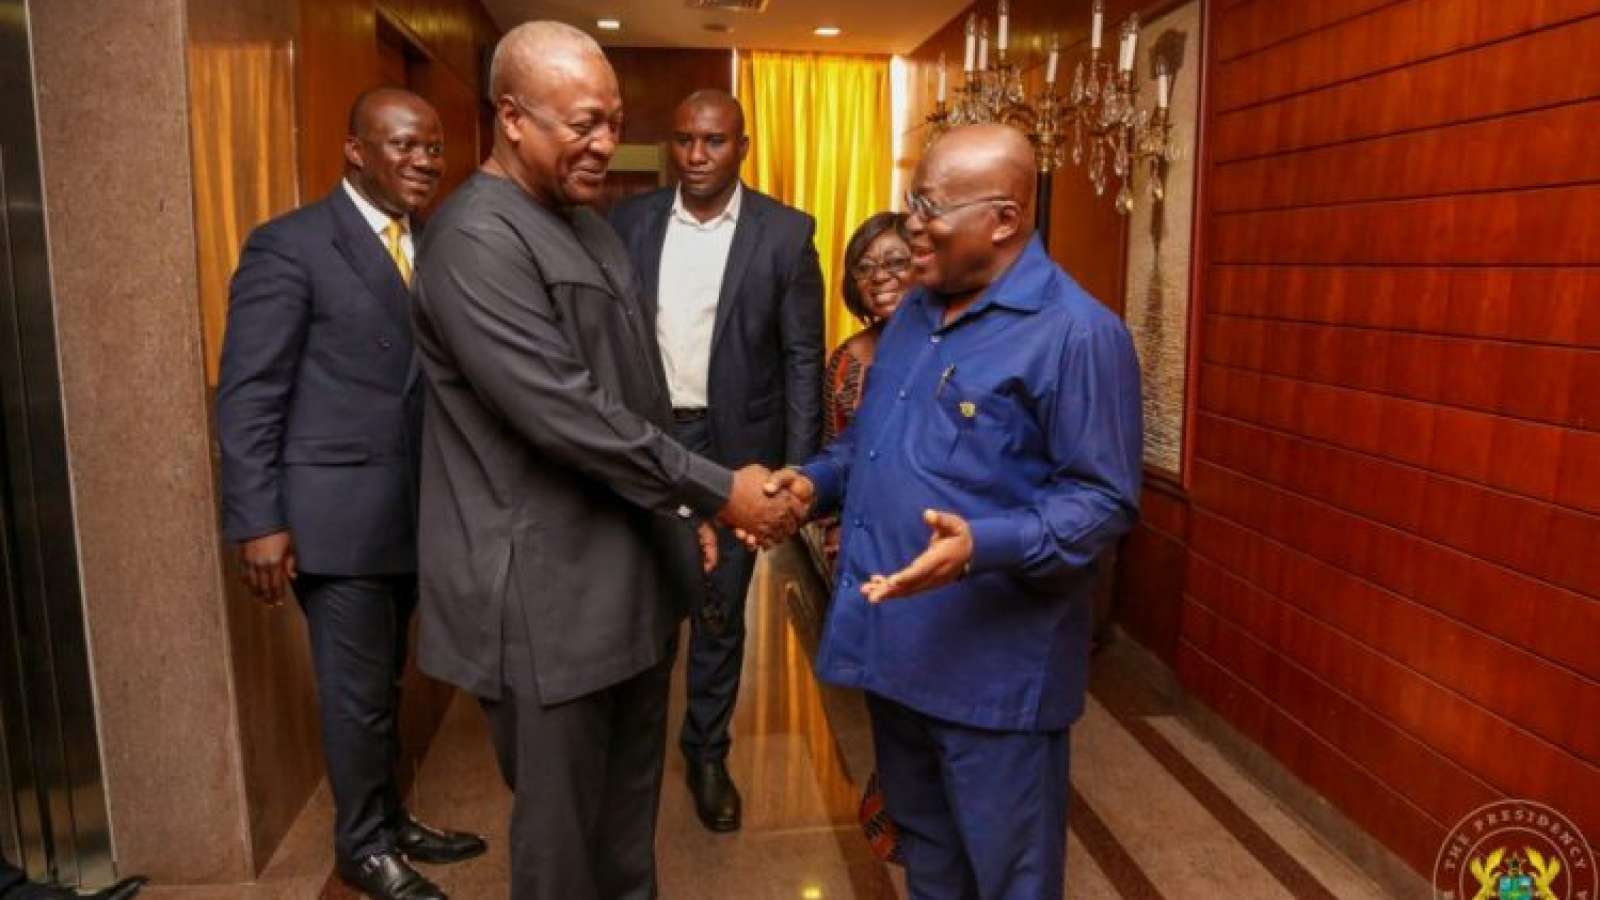 Mahama has better track record on infrastructure than Akufo-Addo – Poll 59